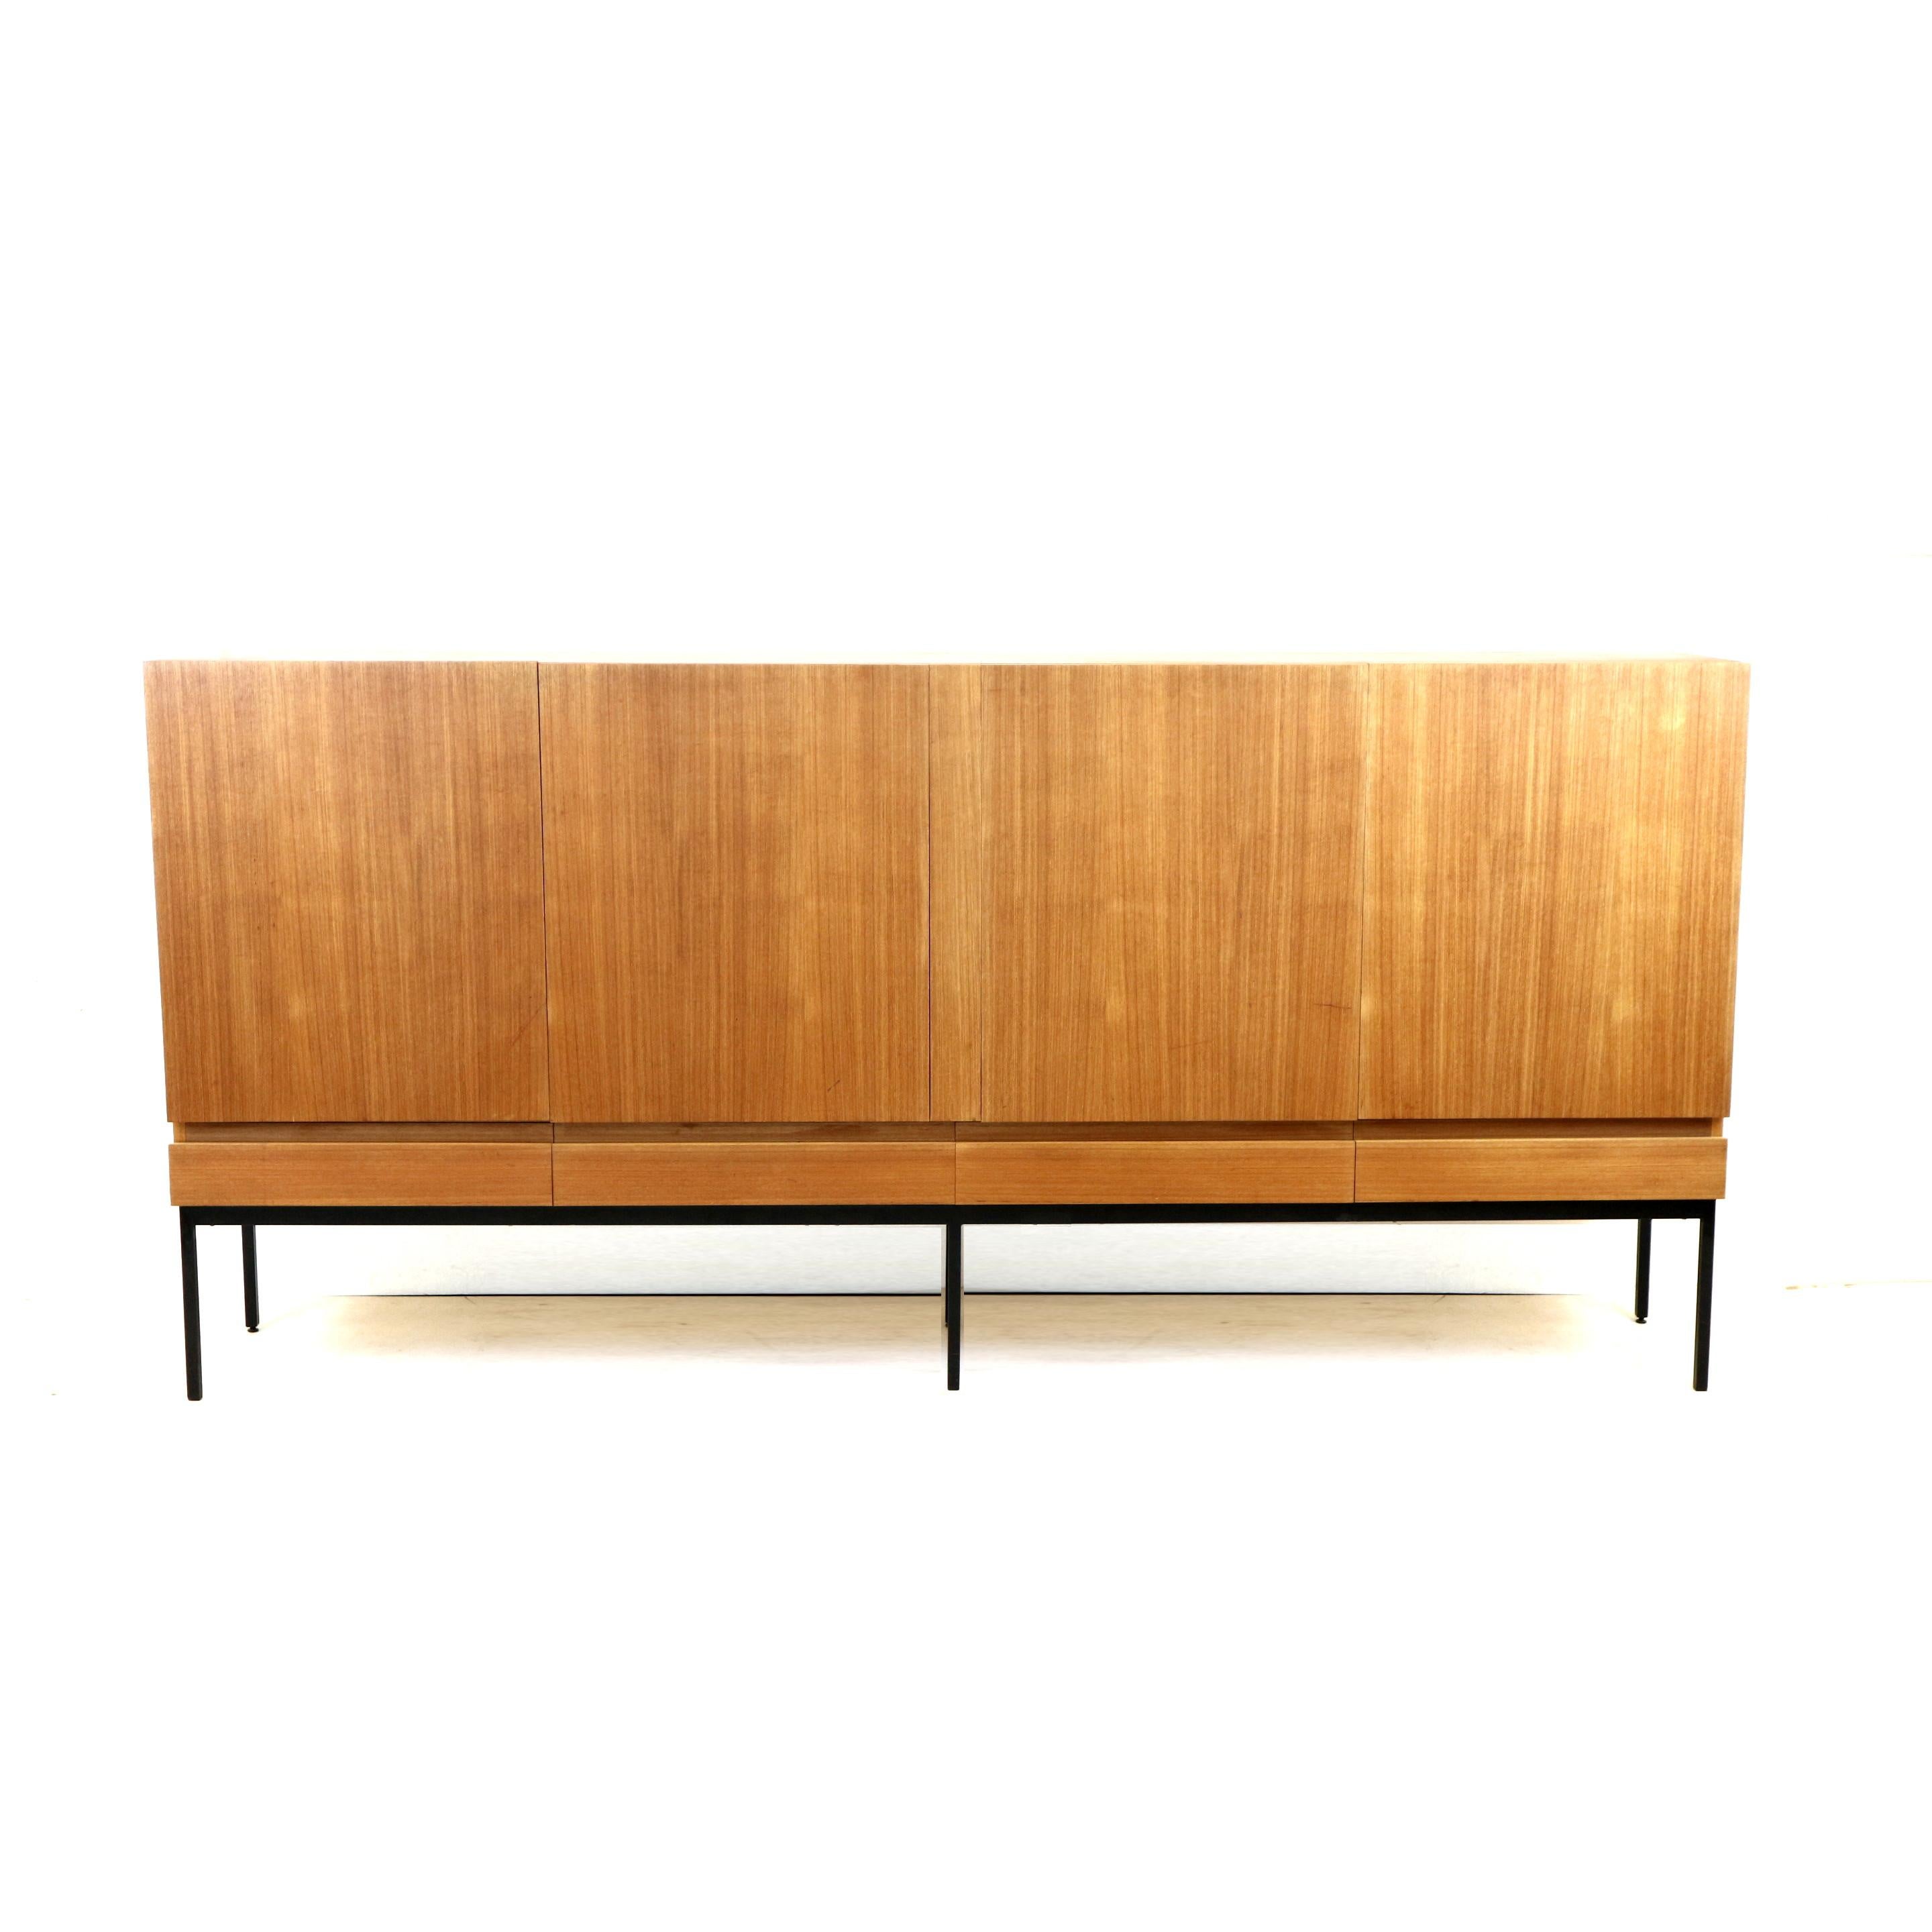 Wood Vintage sideboard / highboard Dieter Waeckerlin B60 for Behr from the 1960s For Sale